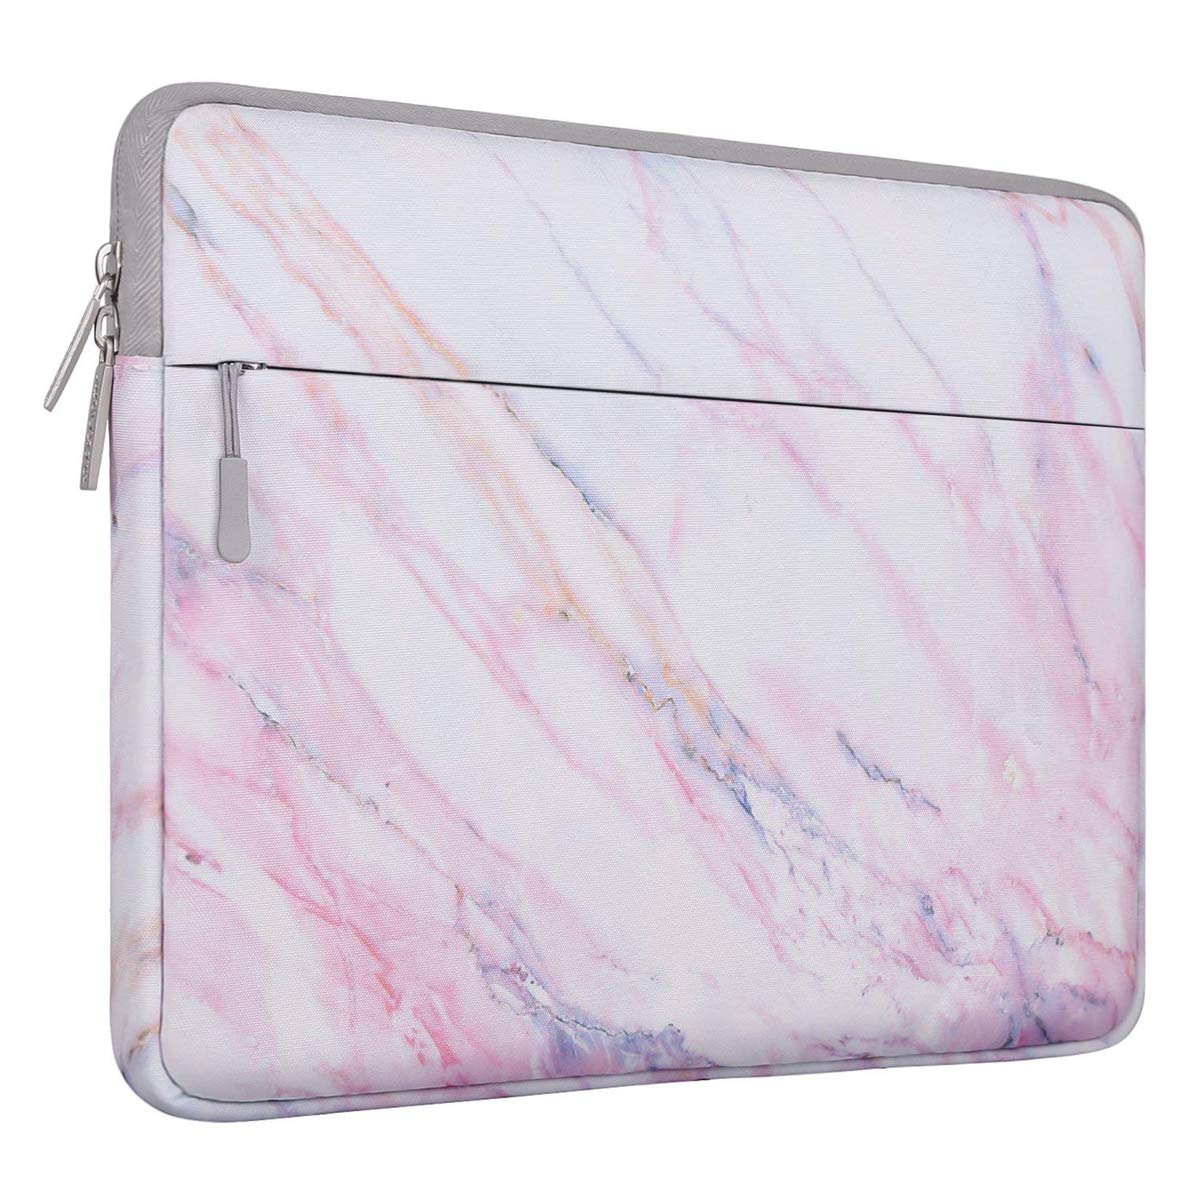 MOSISO Laptop Sleeve Bag Compatible 13-13.3 Inch MacBook Pro, MacBook Air, Notebook Computer with Accessory Pocket, Ultraportable Protective Canvas Marble Pattern Carrying Case Cover, Pink